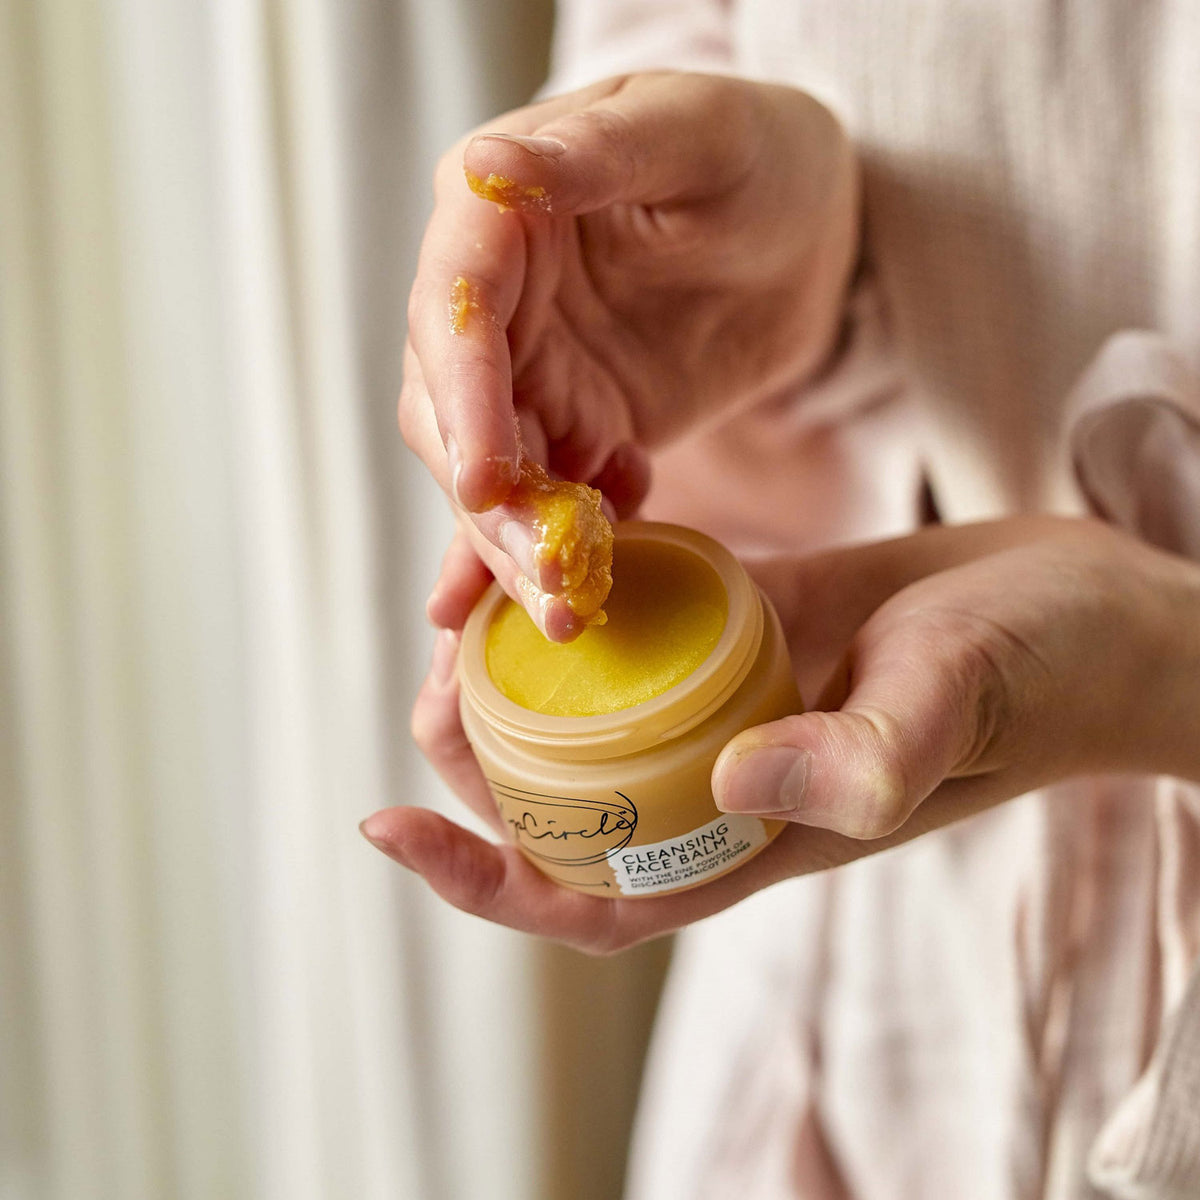 Person holding a jar of the yellow cleansing face balm in one hand, scooping out a quarter sized amount onto fingers with the other hand.